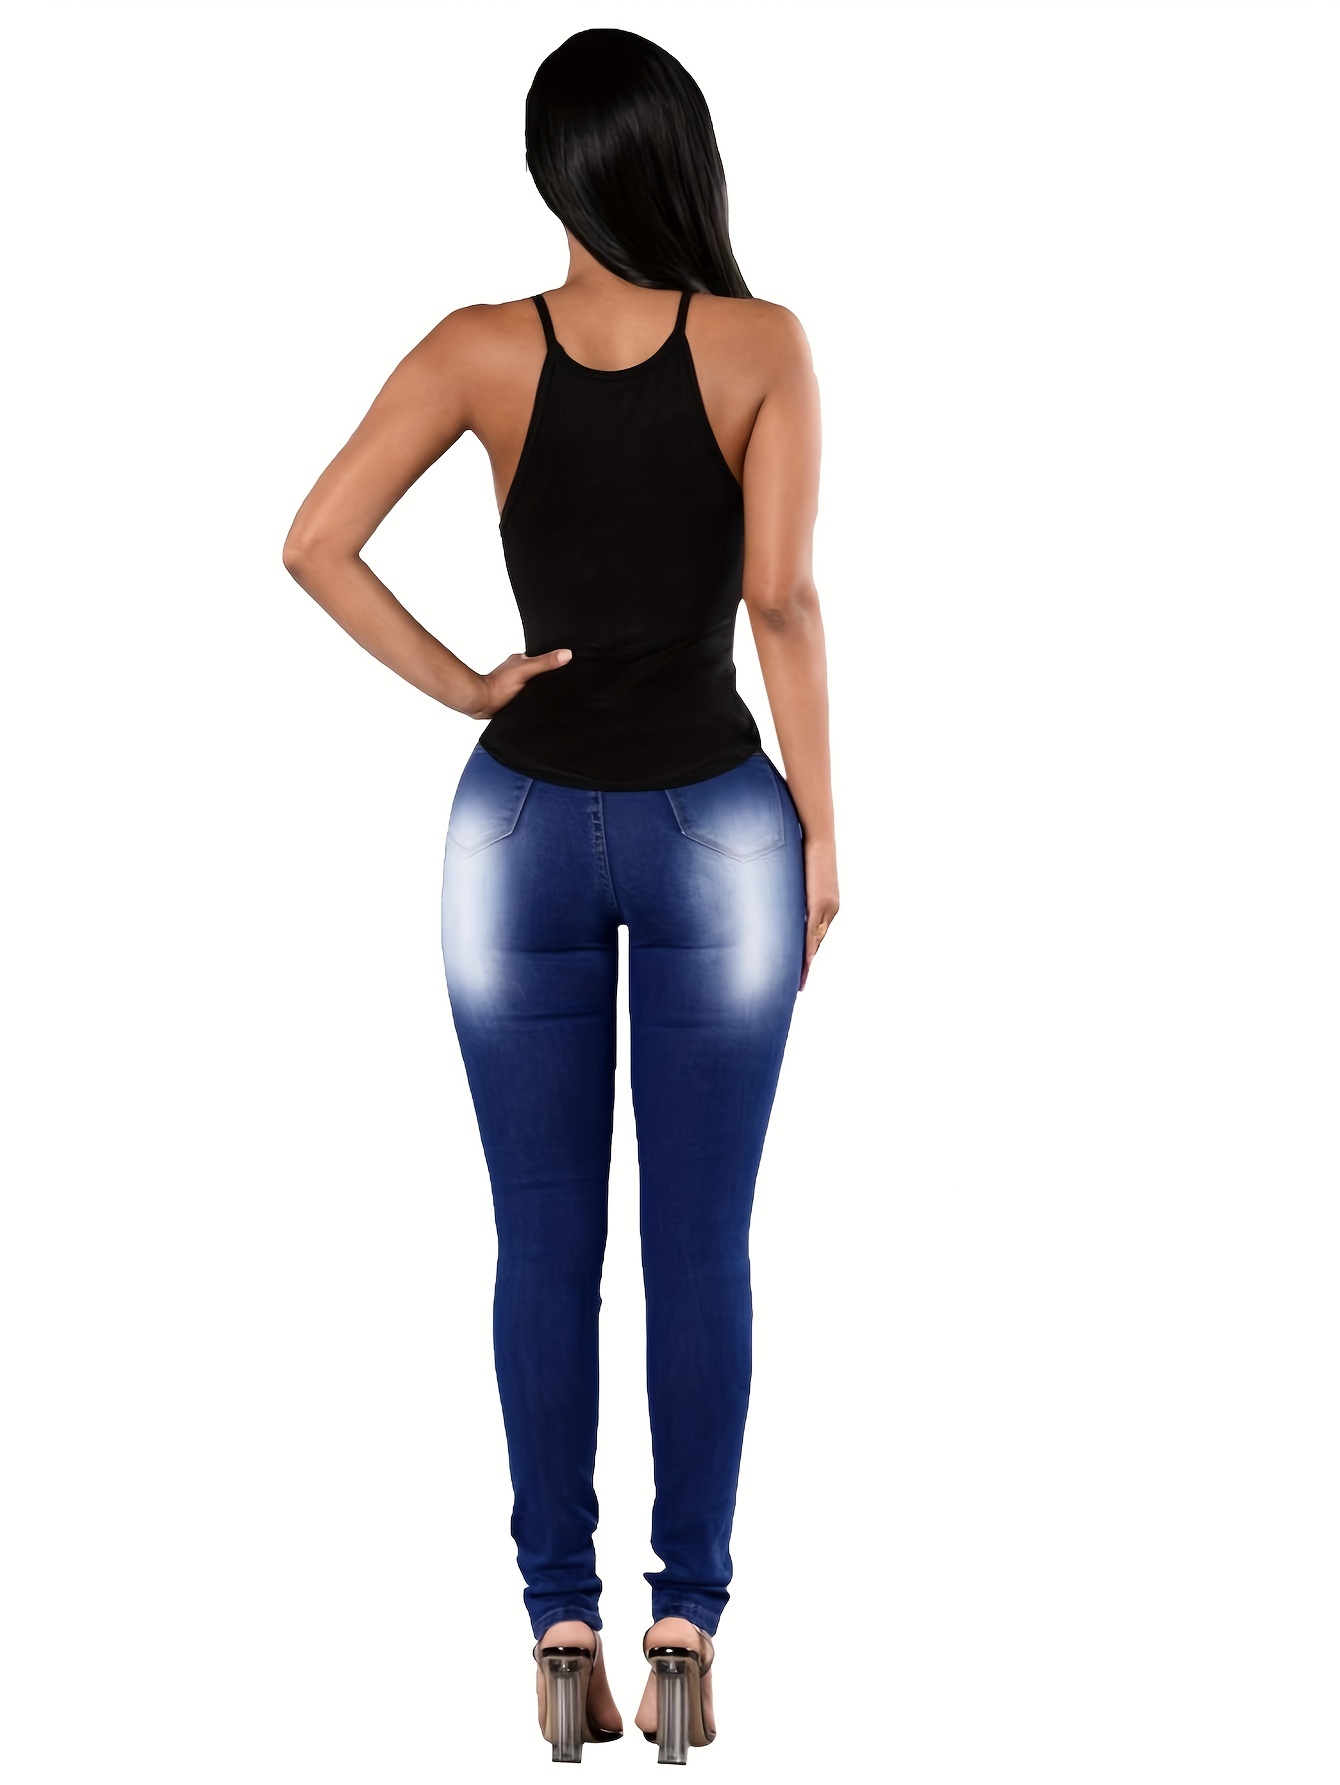 Blue Ripped Holes Skinny Jeans, Slim Fit Slant Pockets Distressed Tight  Jeans, Women's Denim Jeans & Clothing